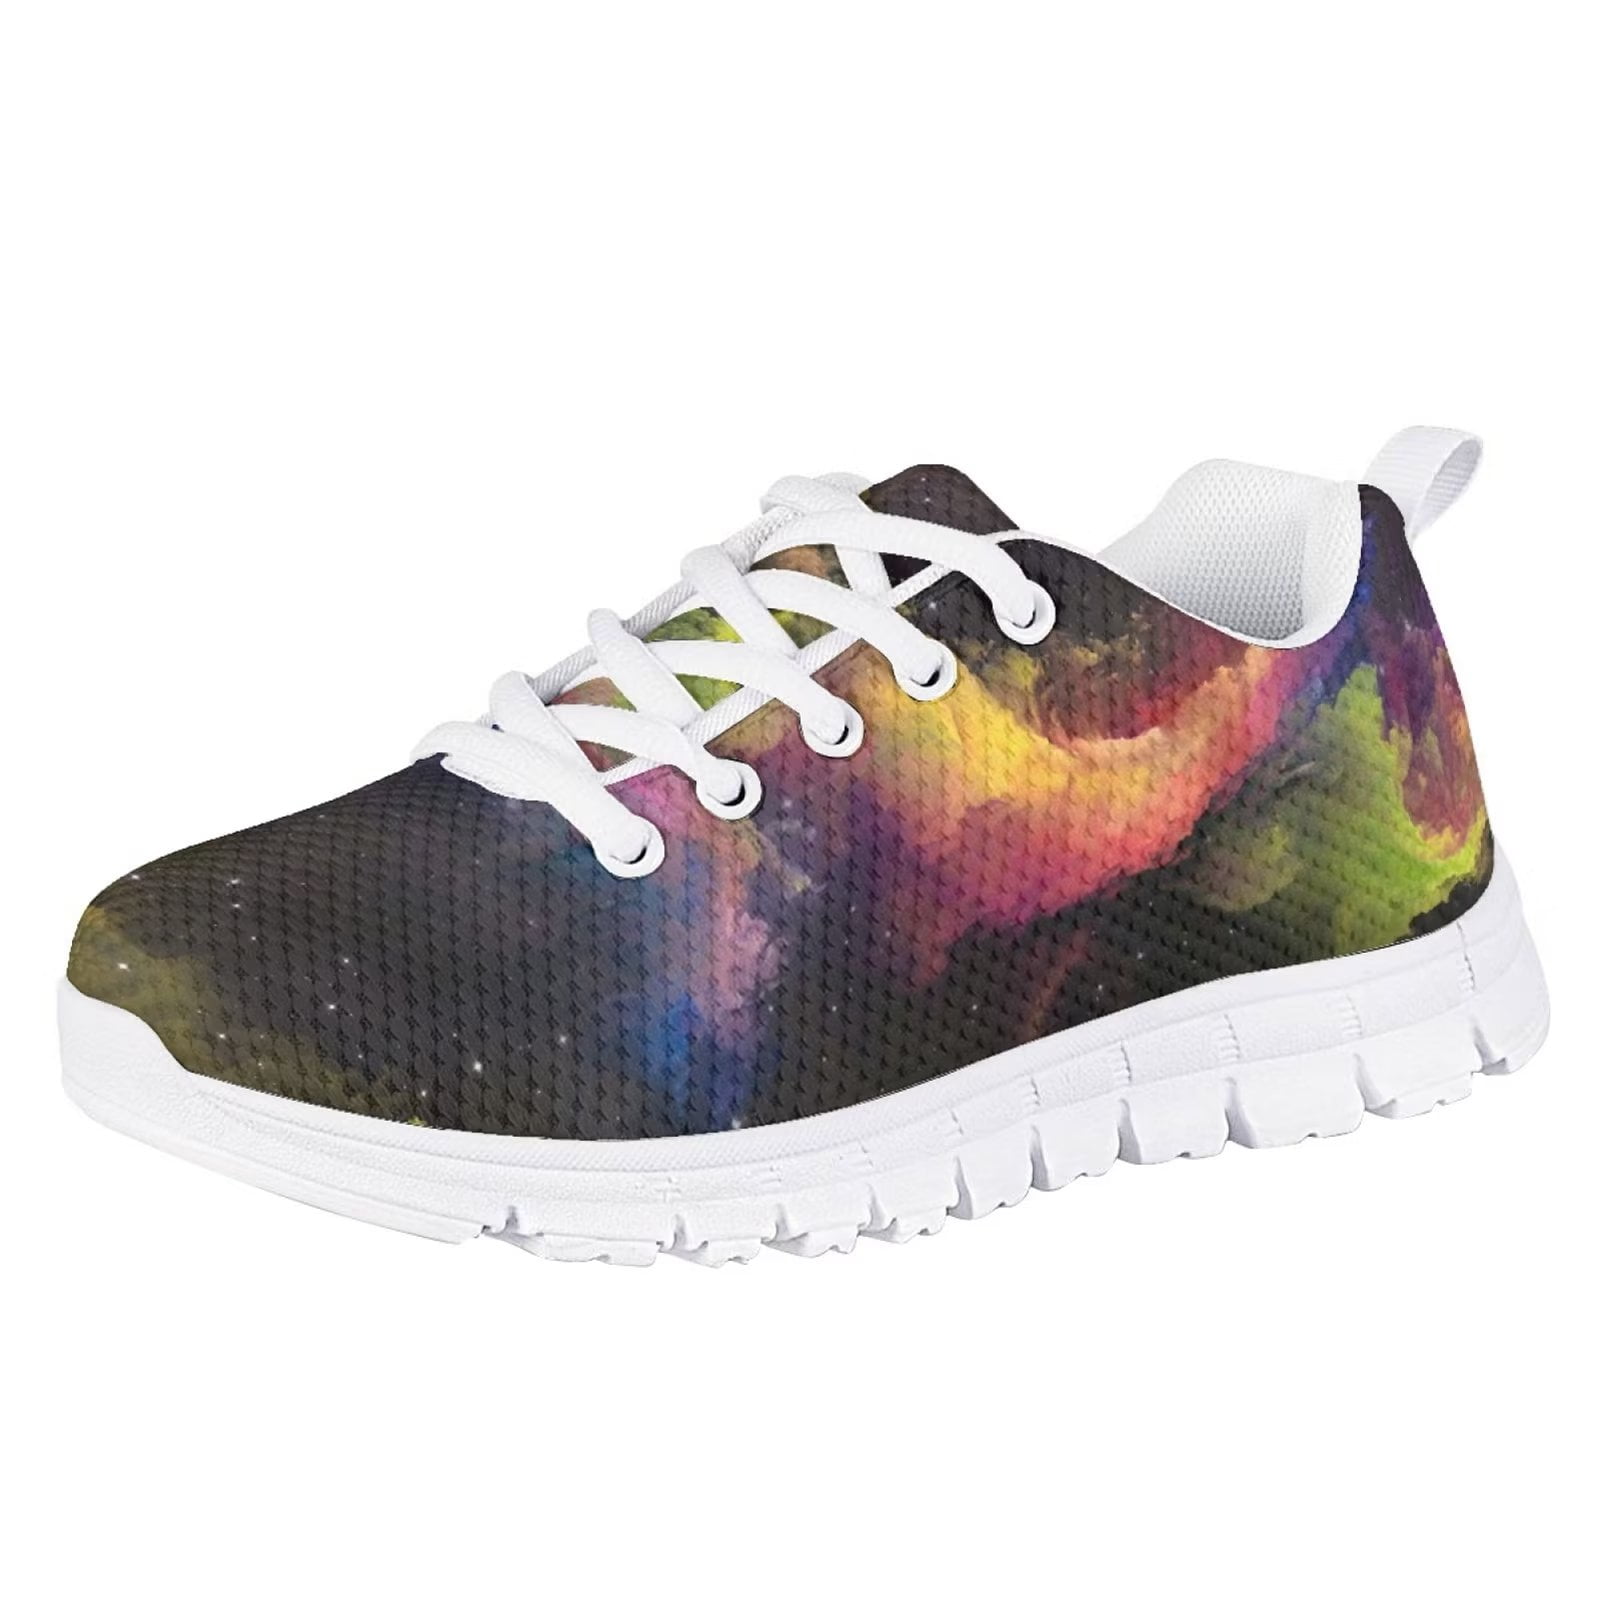 Pzuqiu Universe Galaxy Girls Tennis Shoes 5 Lightweight Running Sneakers Lace Athletic Shoes Comfy - Walmart.com